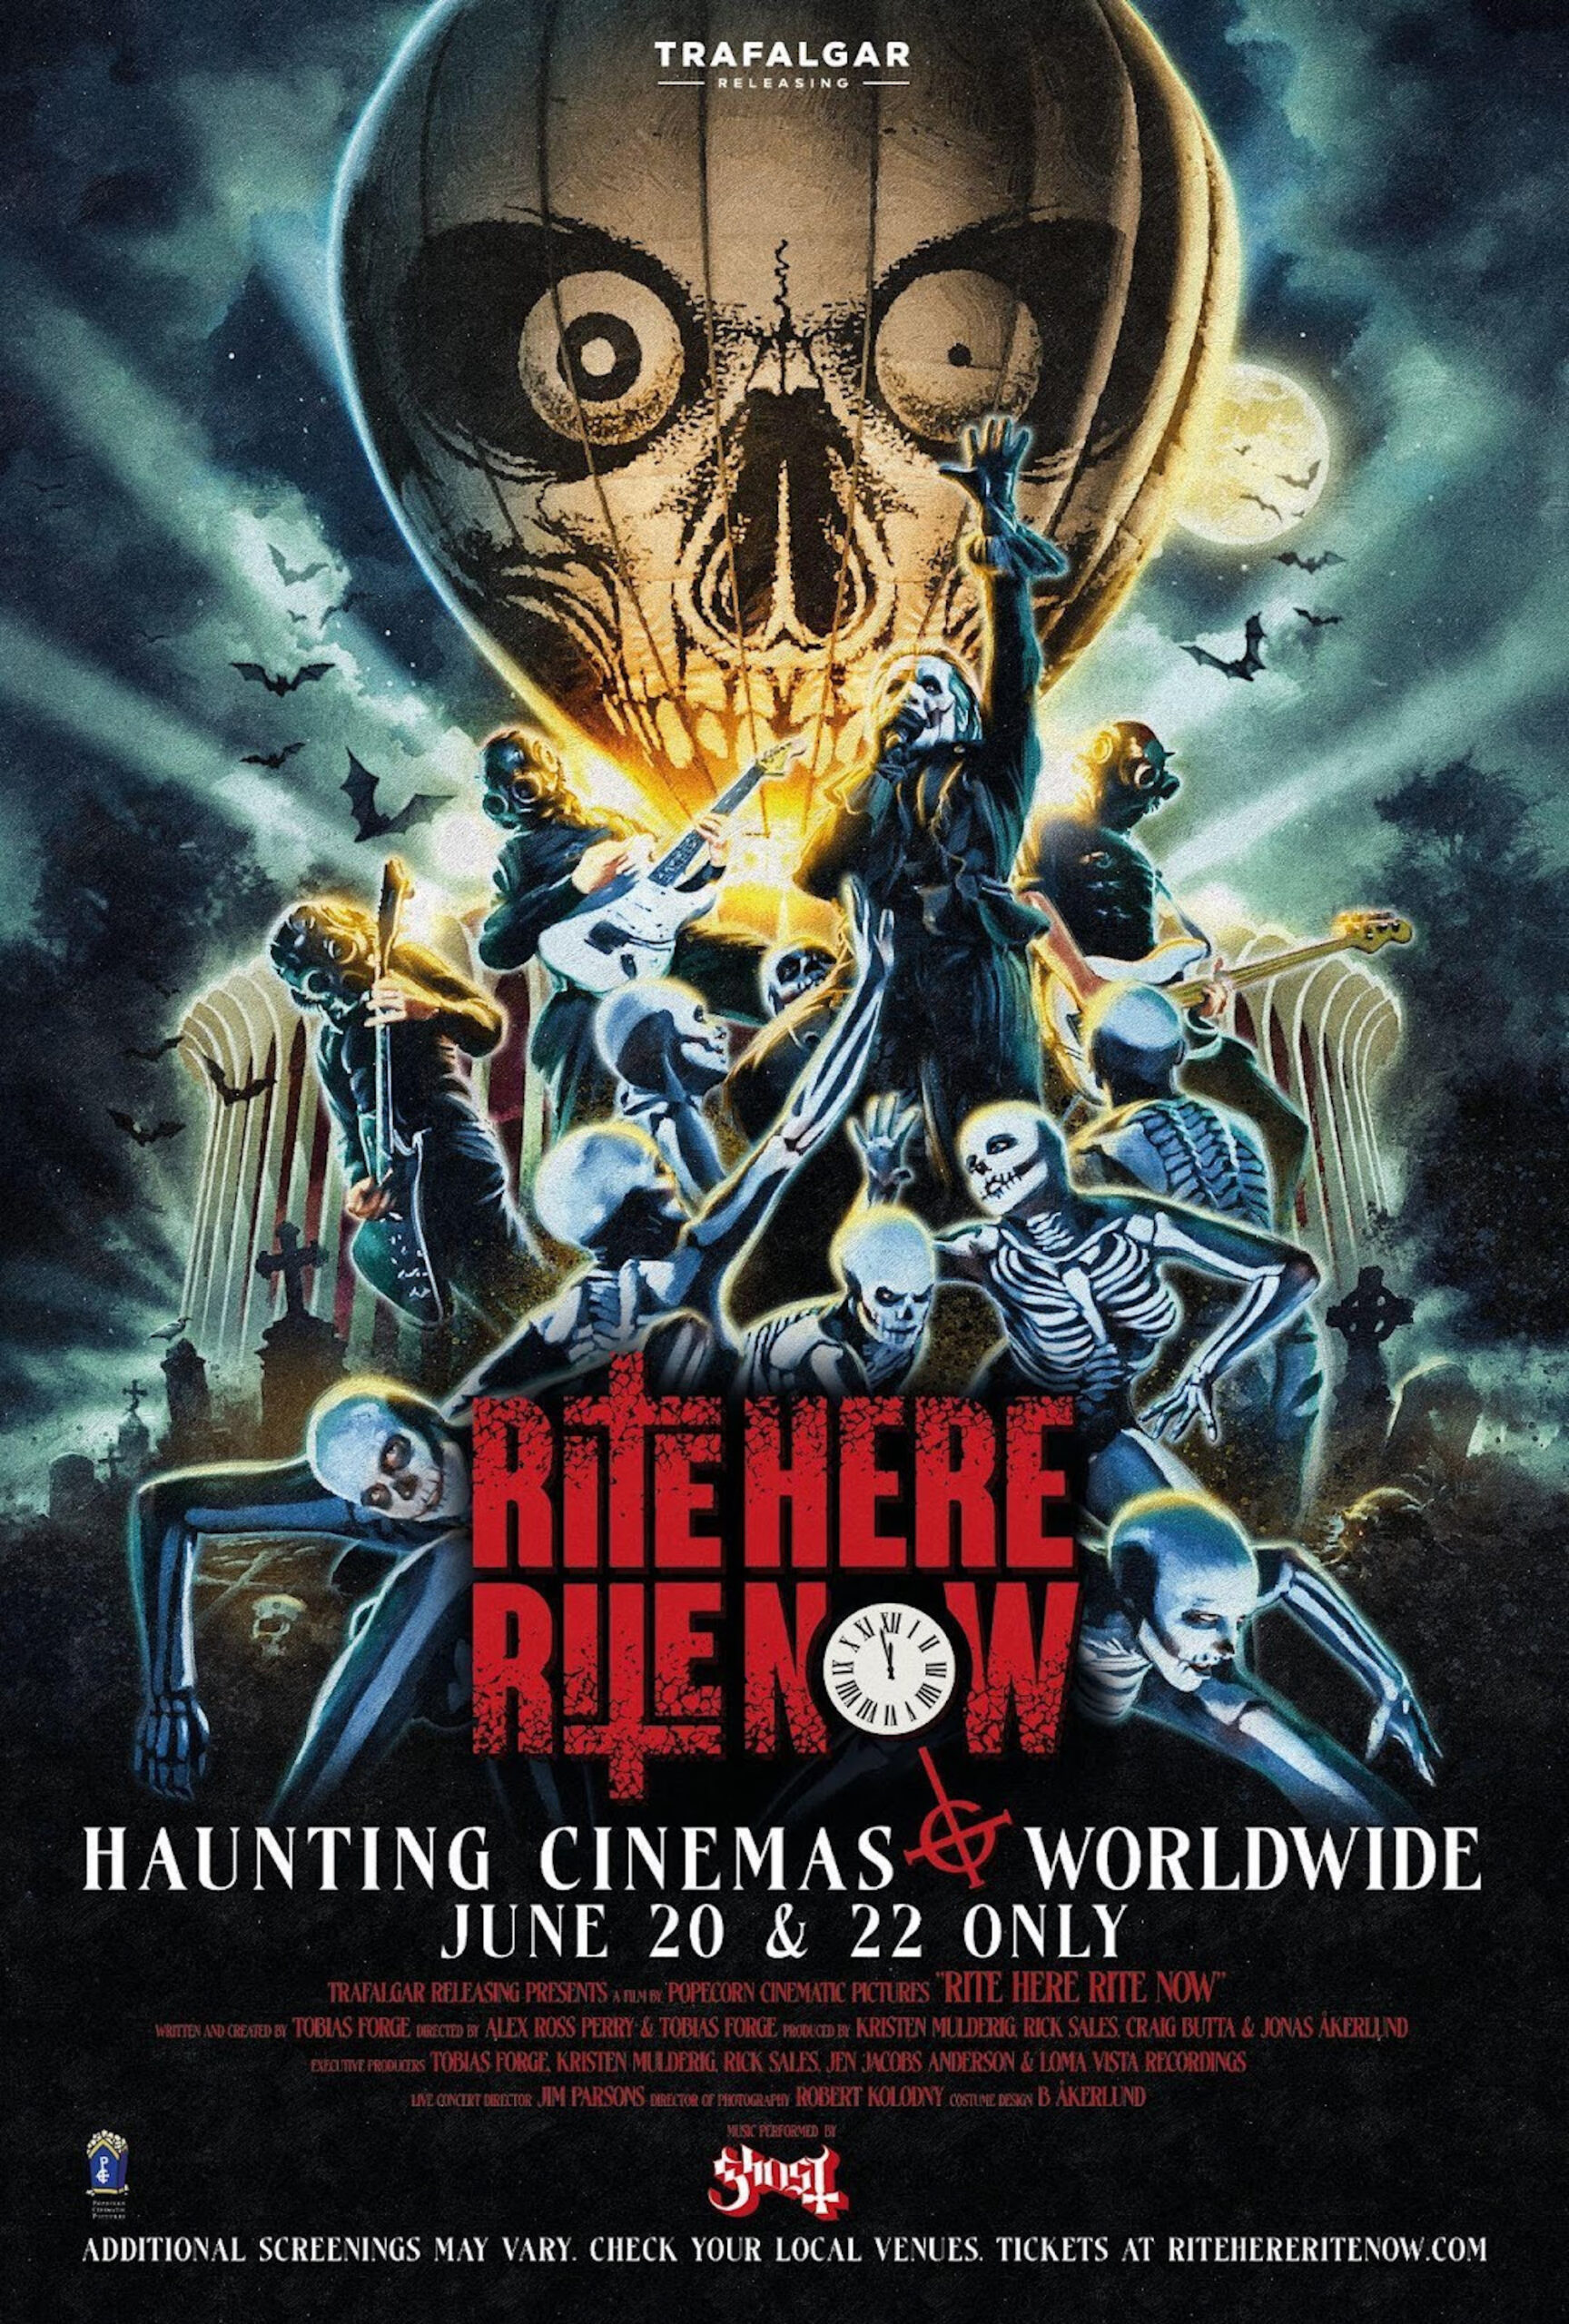 Ghost 'Rite Here Rite Now' film poster